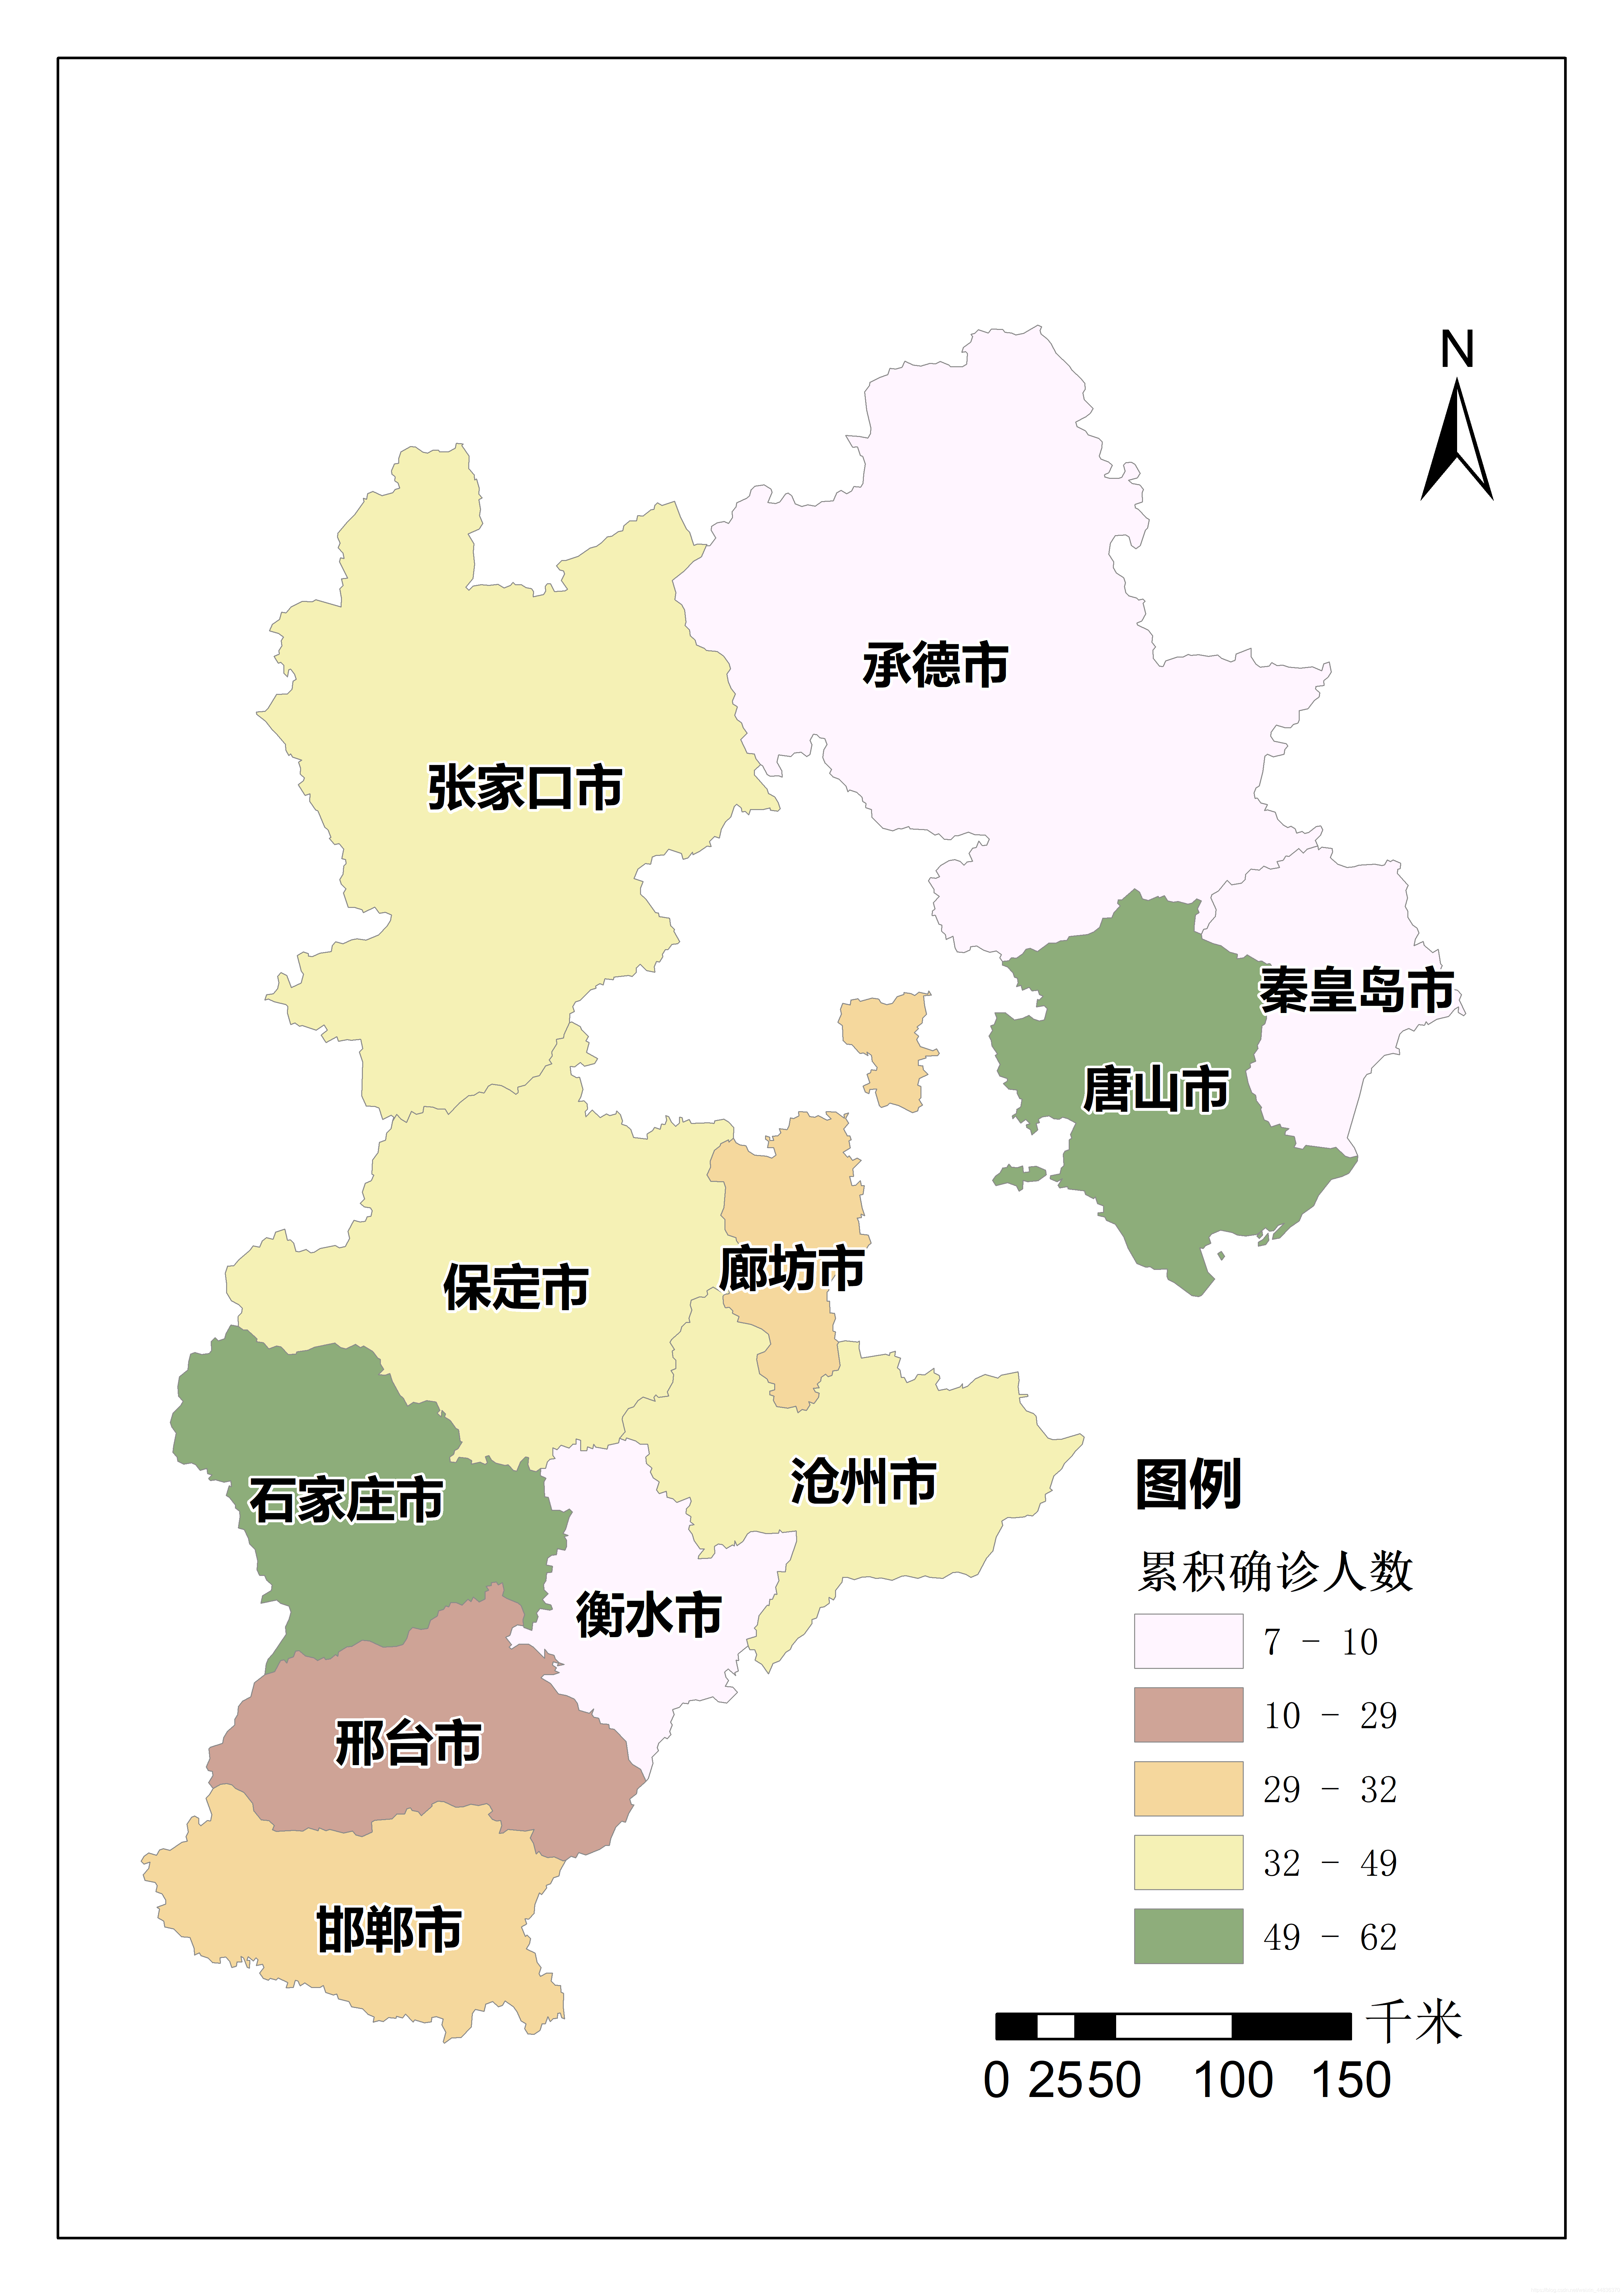 Distribution map of cumulative confirmed cases of COVID-19 in Hebei Province on January 6